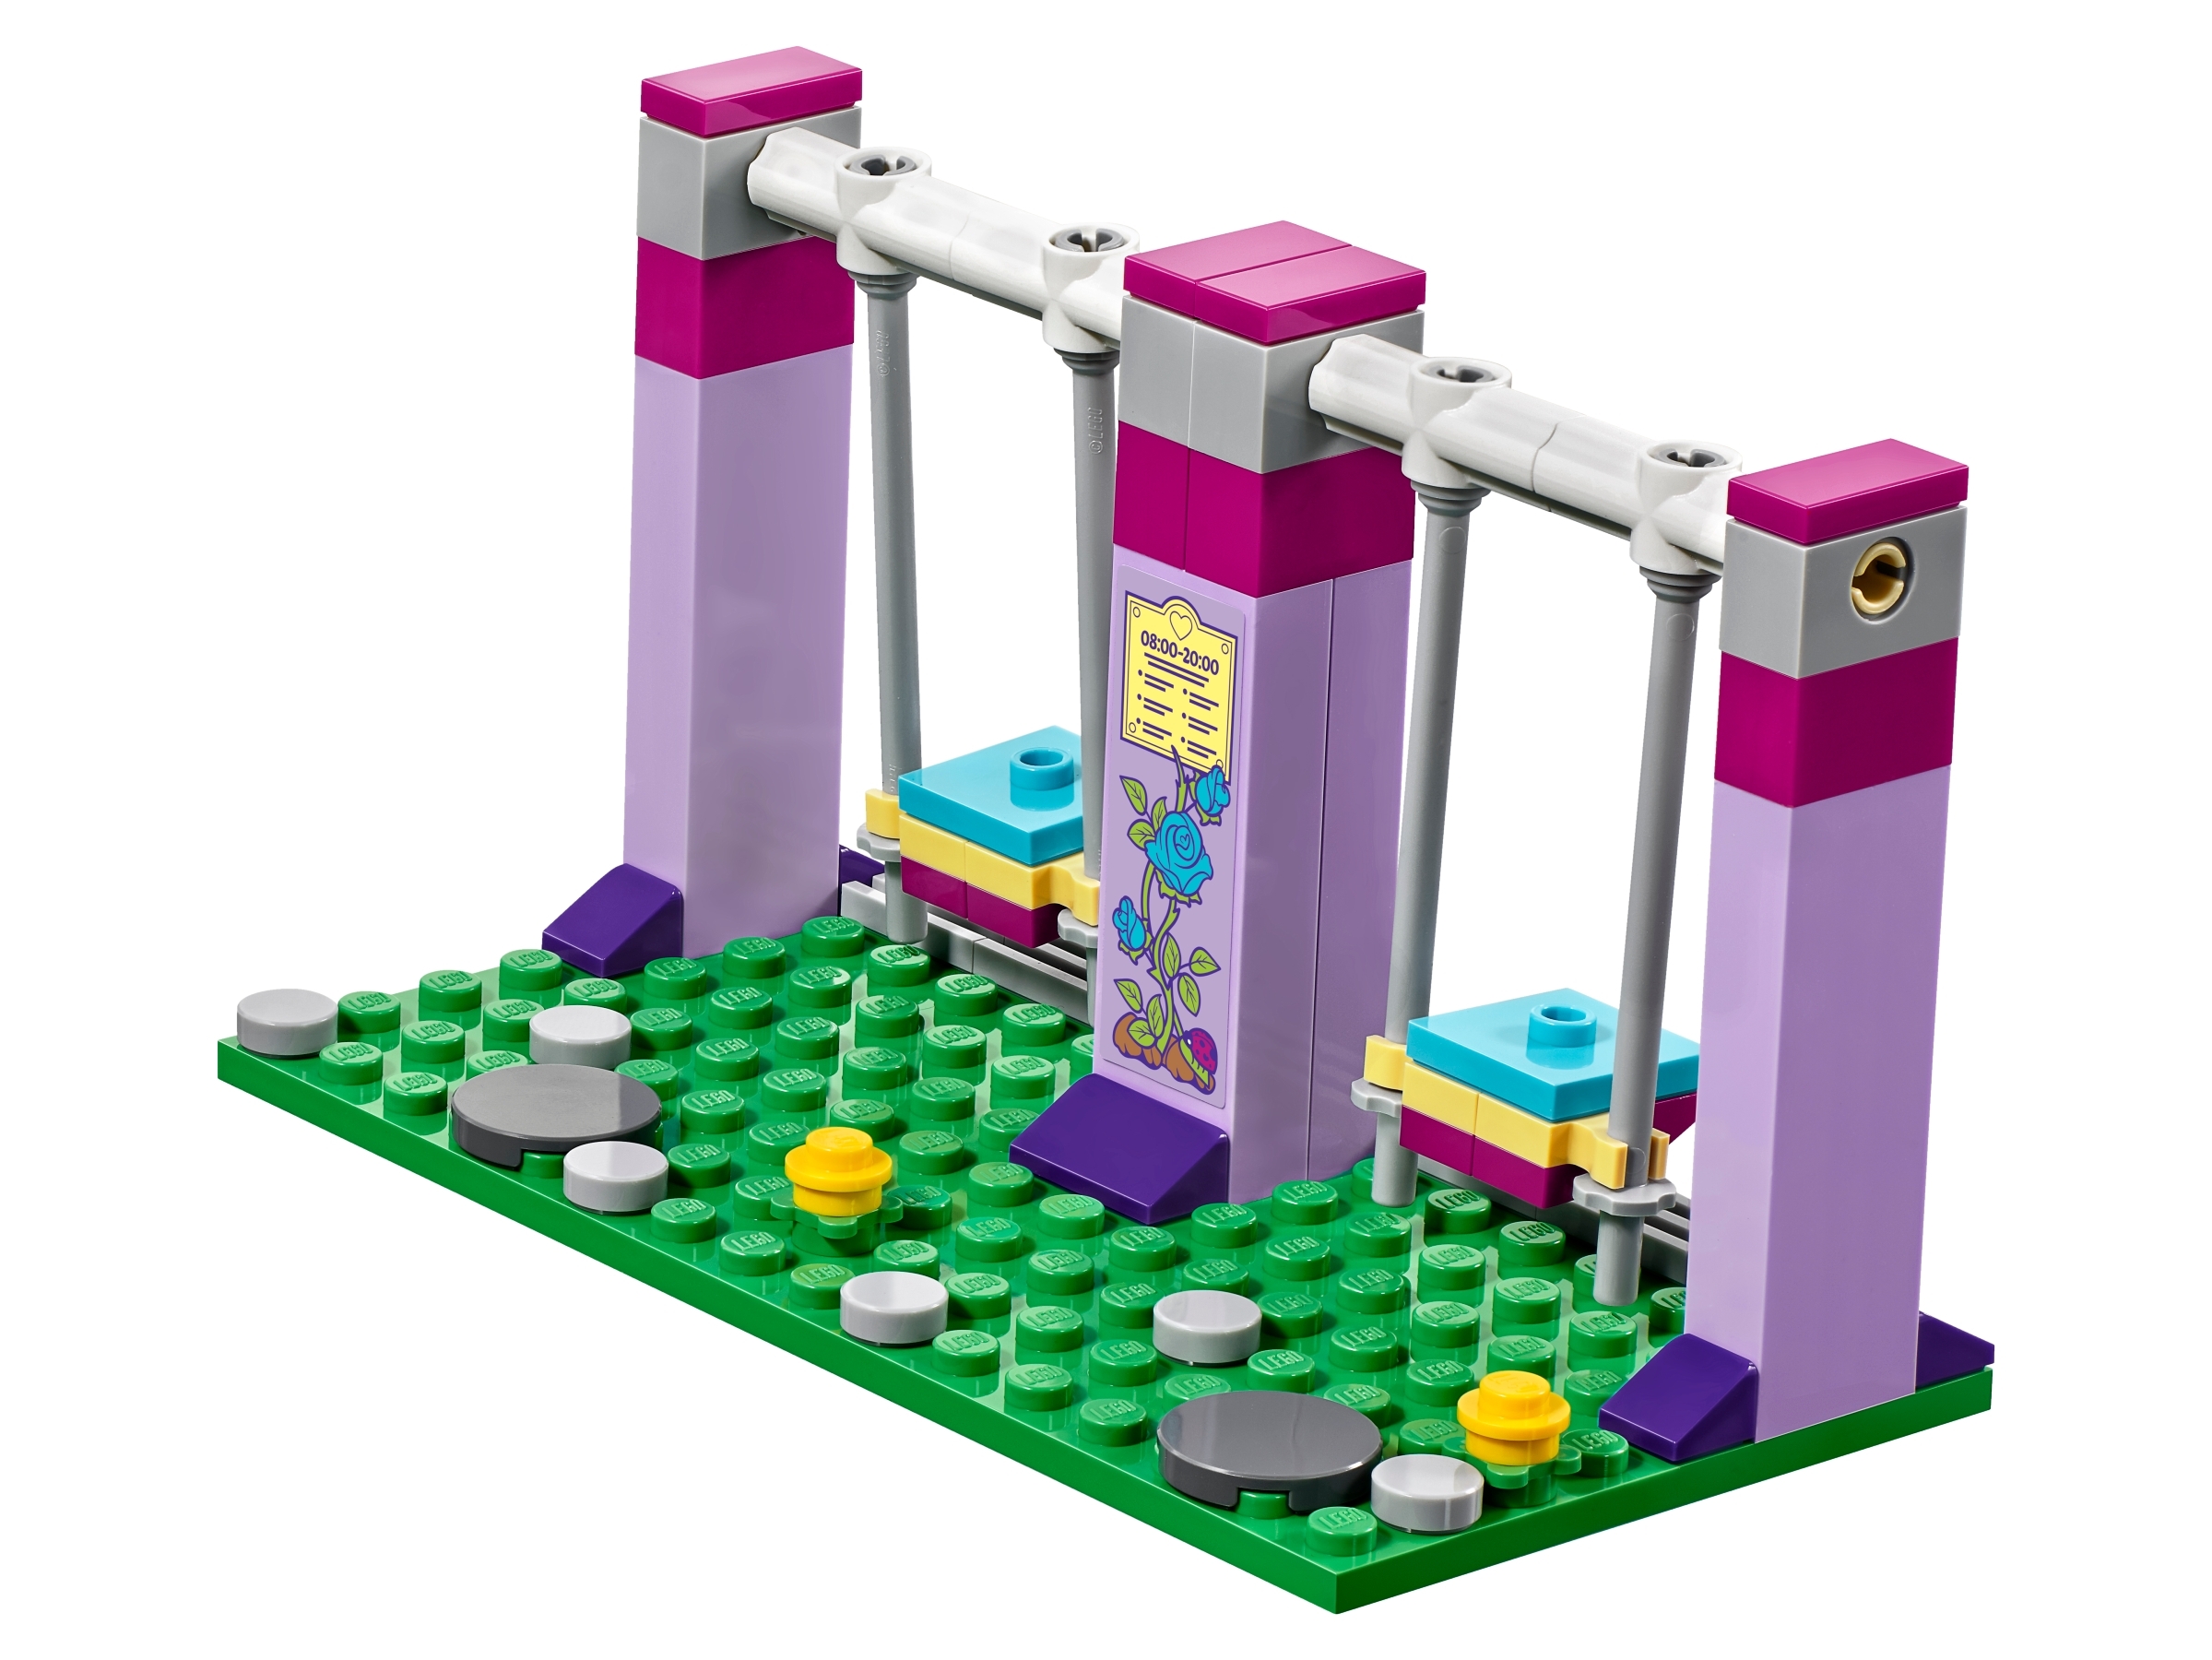 City Playground 41325 | Friends | Buy online at the Official LEGO® Shop US